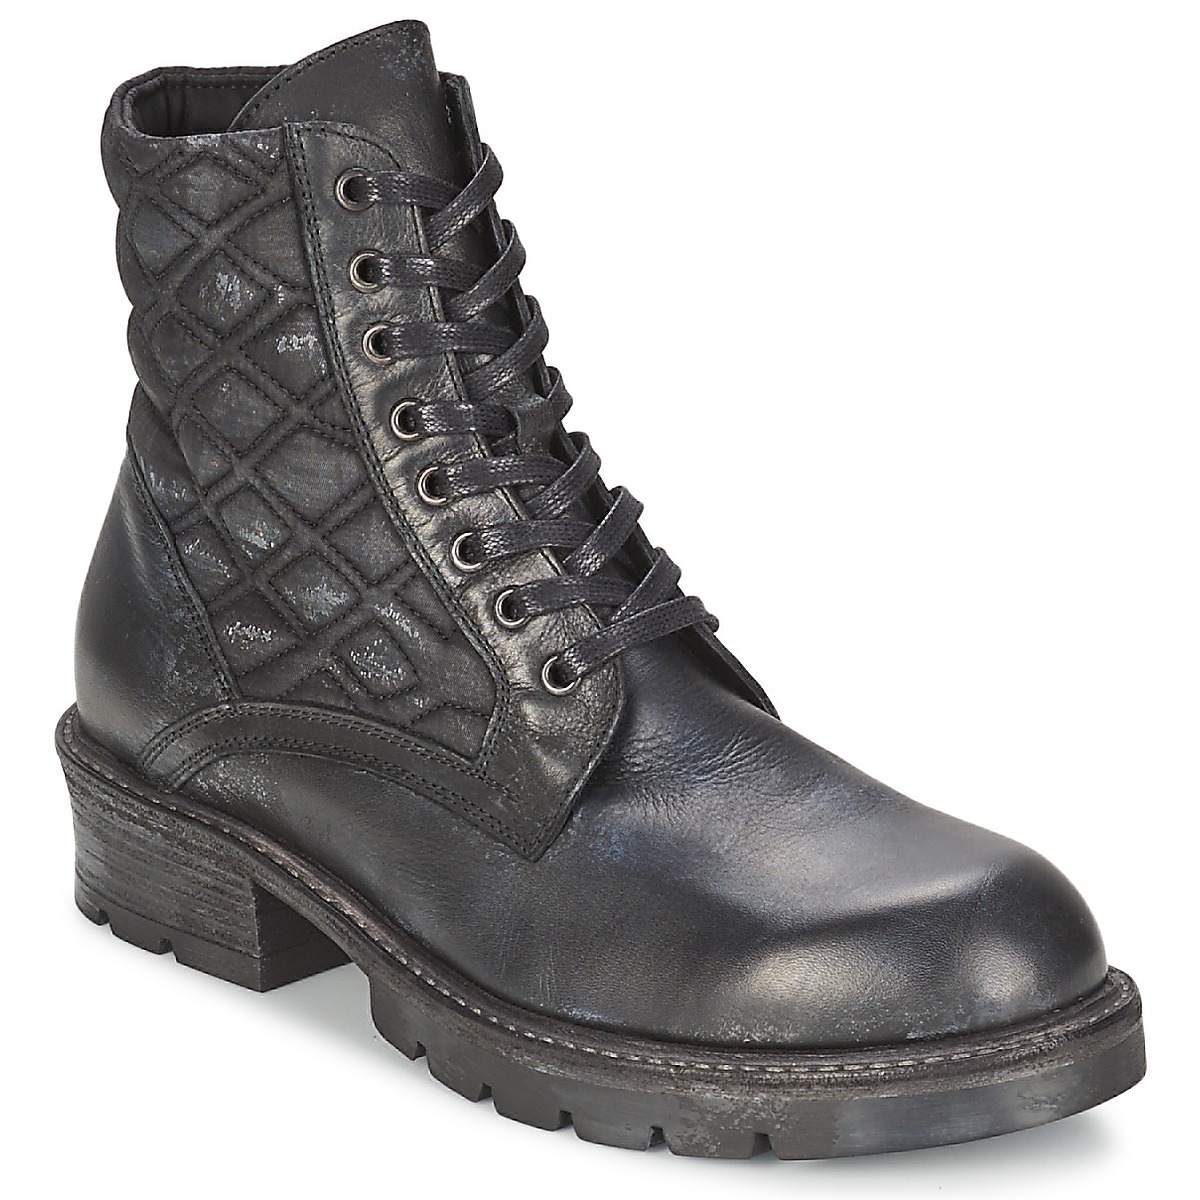 Strategia - Black Boots from Spartoo GOOFASH